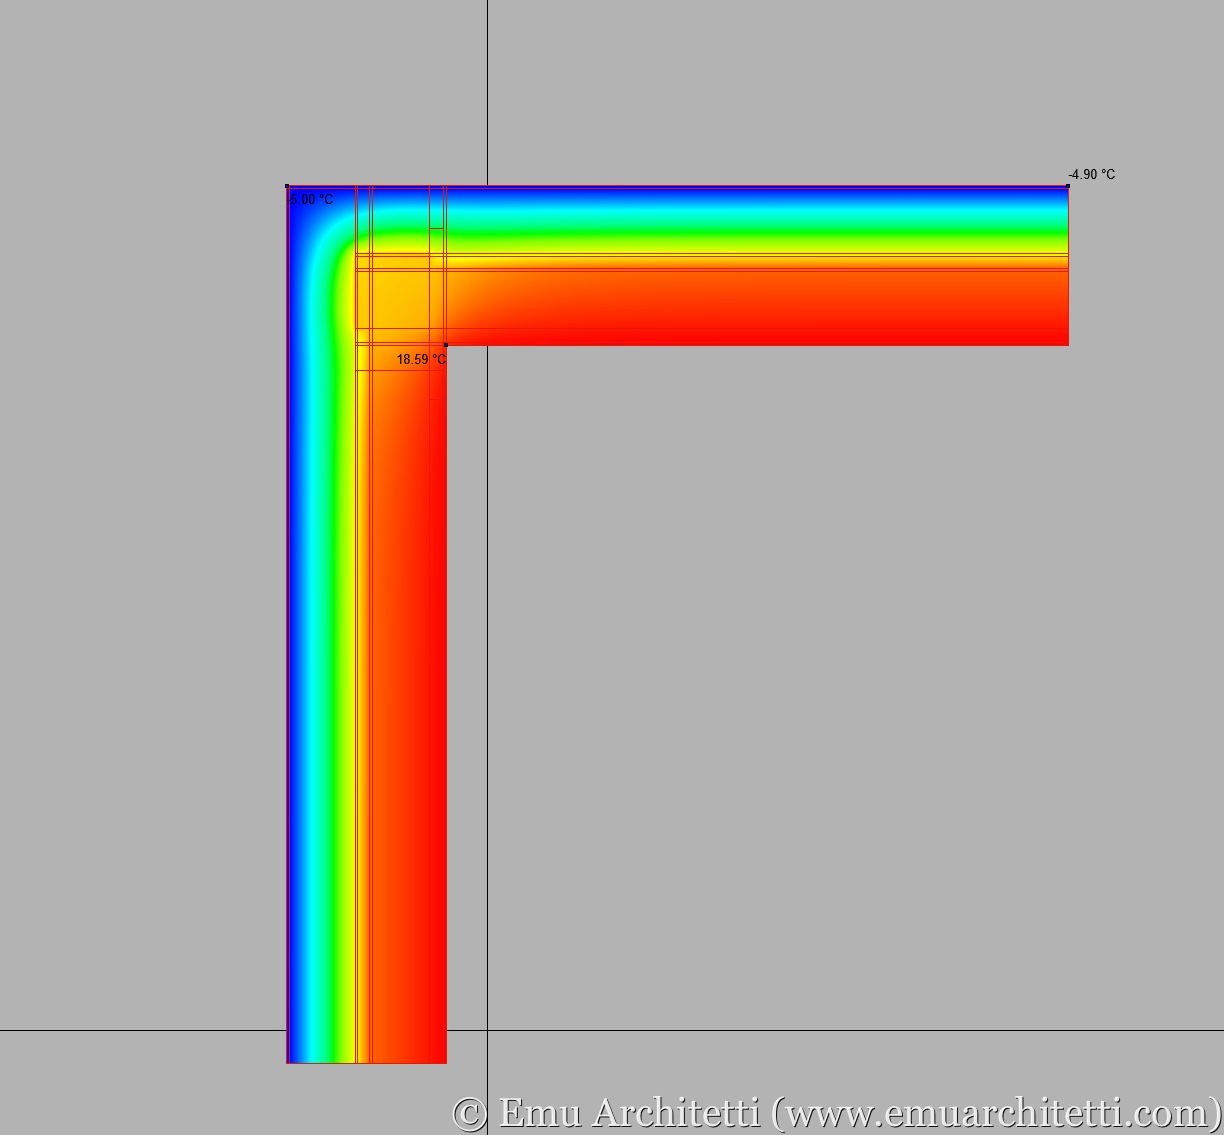 A thermal bridge caused by the geometry of the structure, that generates a discontinuity in the thermal envelope.